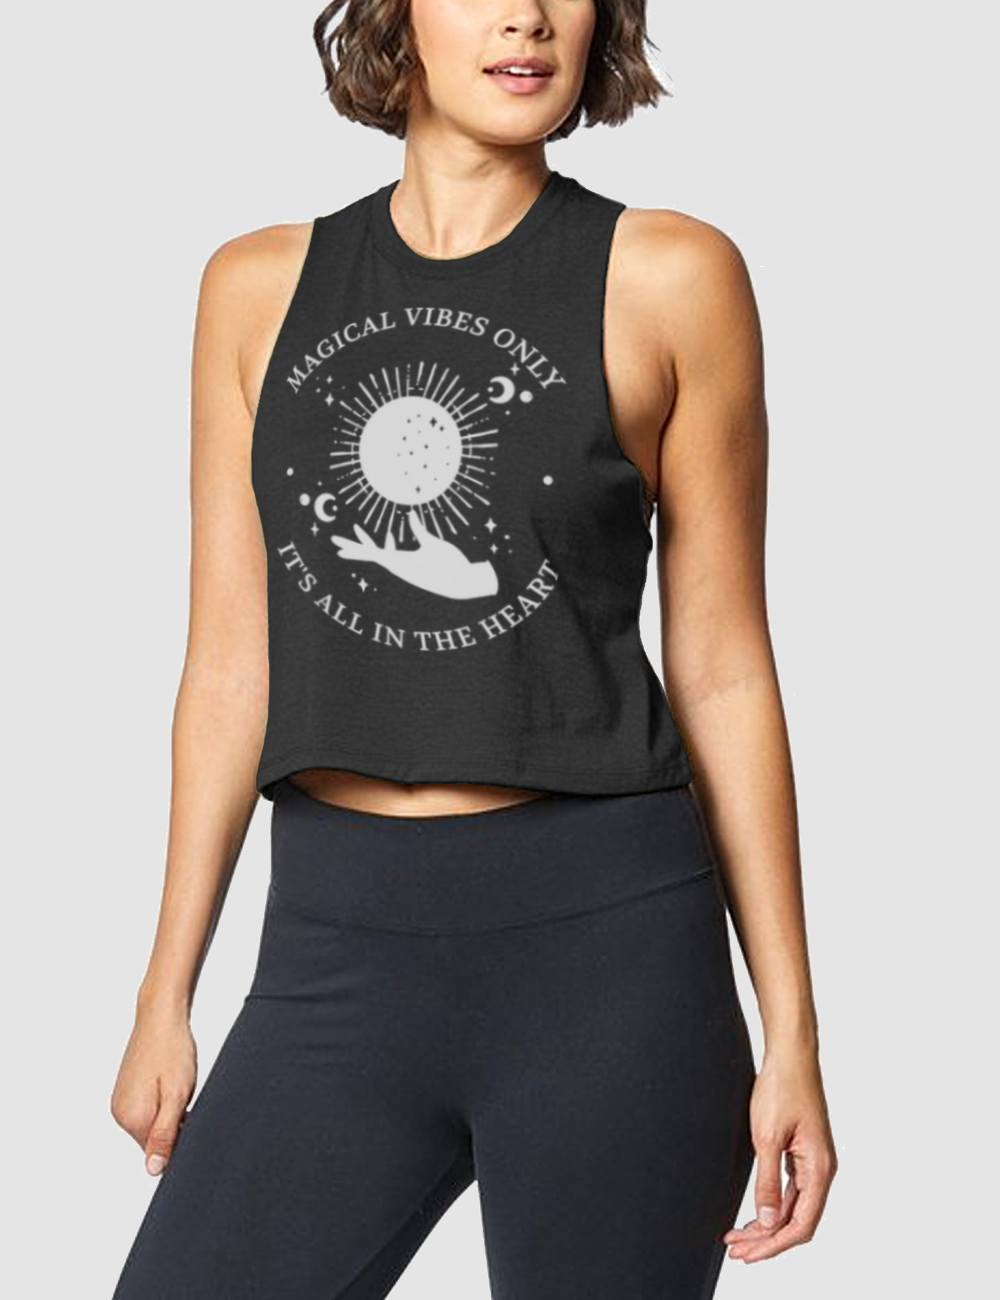 Magical Vibes Only | Women's Sleeveless Racerback Cropped Tank Top OniTakai